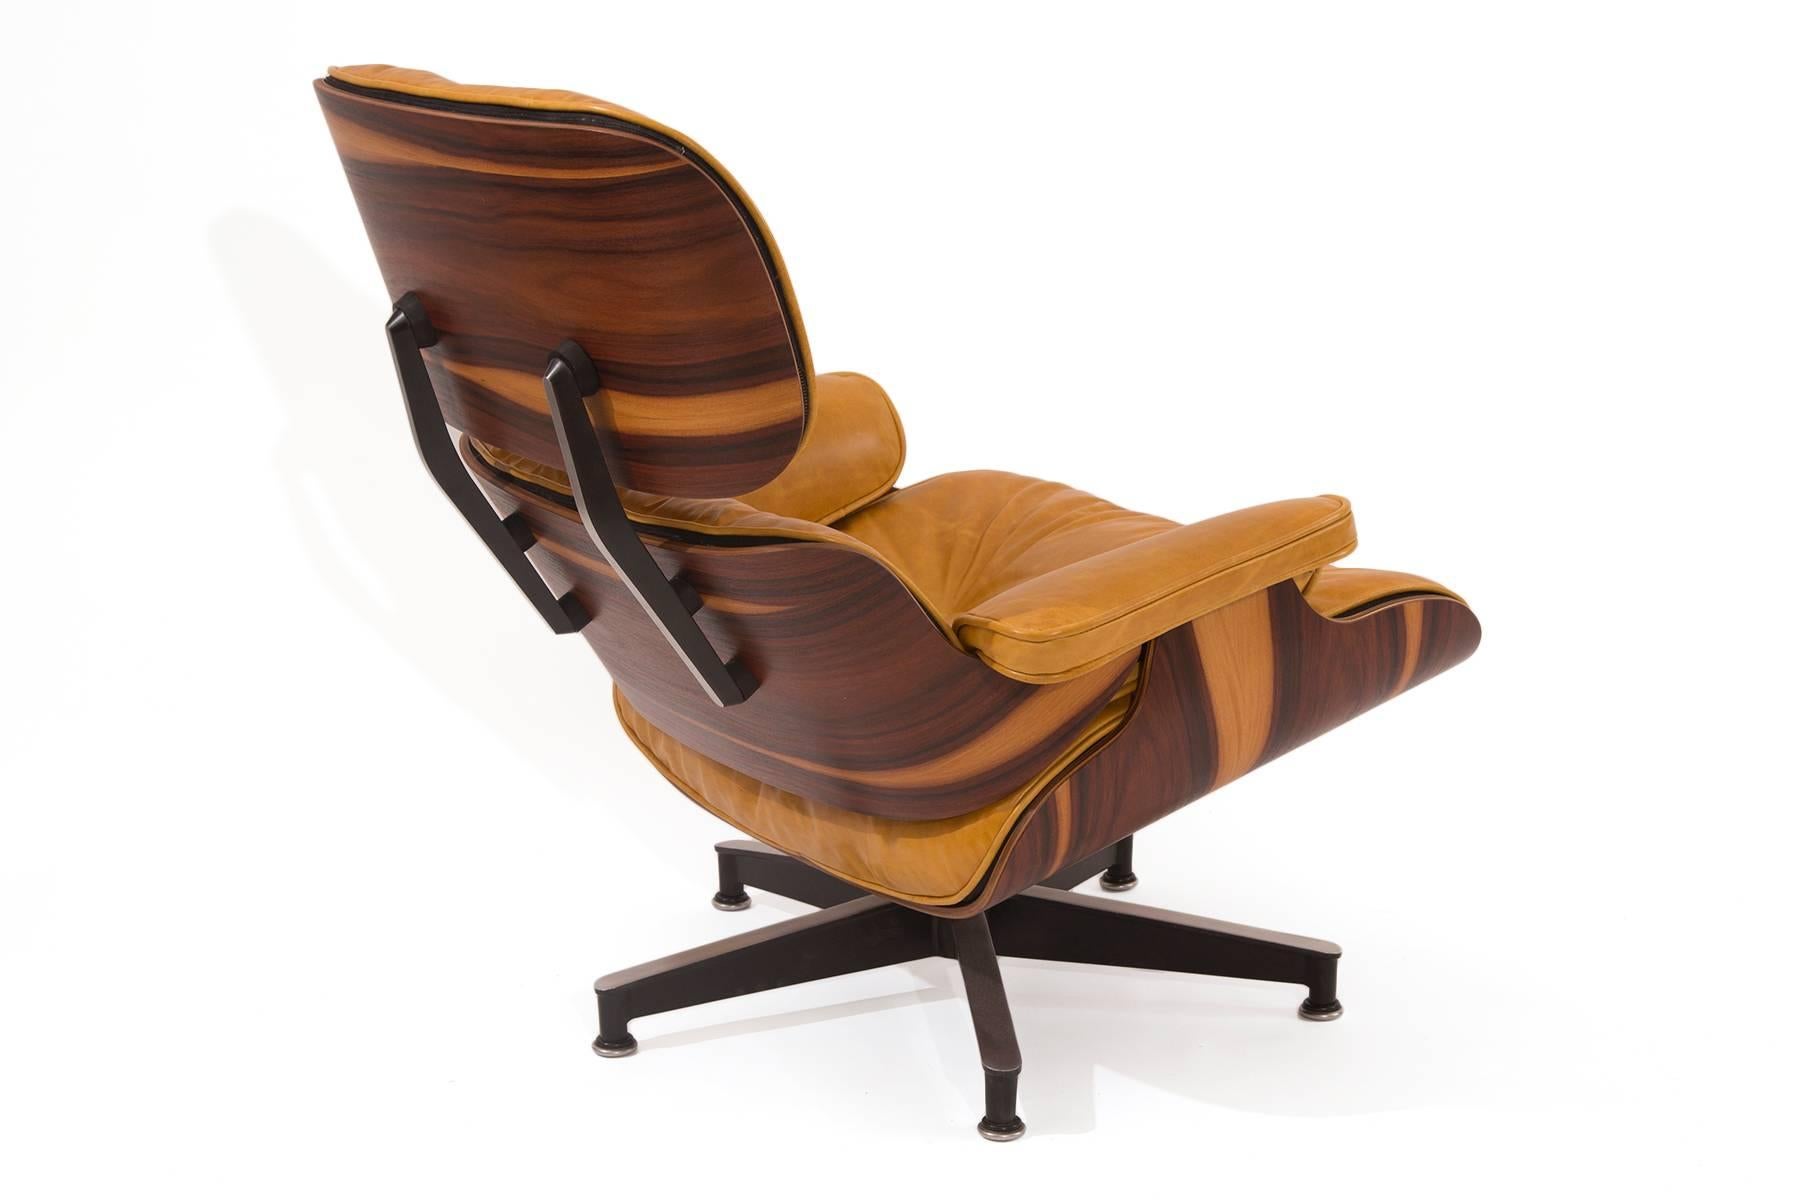 Charles and Ray Eames for Herman Miller 670 lounge chair and ottoman circa early 1970s. This example has incredible sap grain to the rosewood and has been upholstered in a perfectly patinated down filled butterscotch leather. Price listed is for the